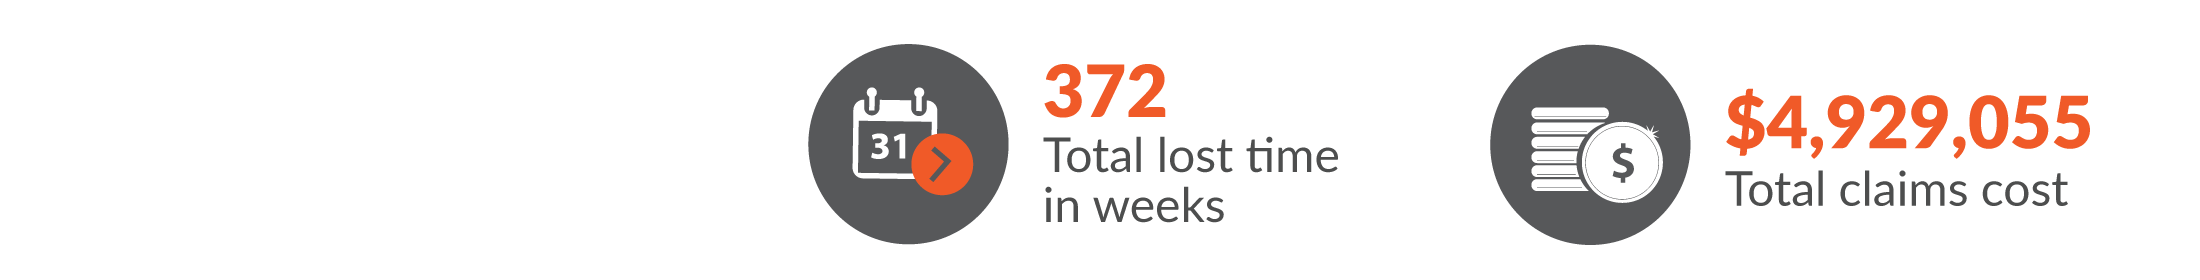 This infographic shows the total workers compensation claims resulted in 372 total lost time in weeks and $4,929,055 was paid in benefits.